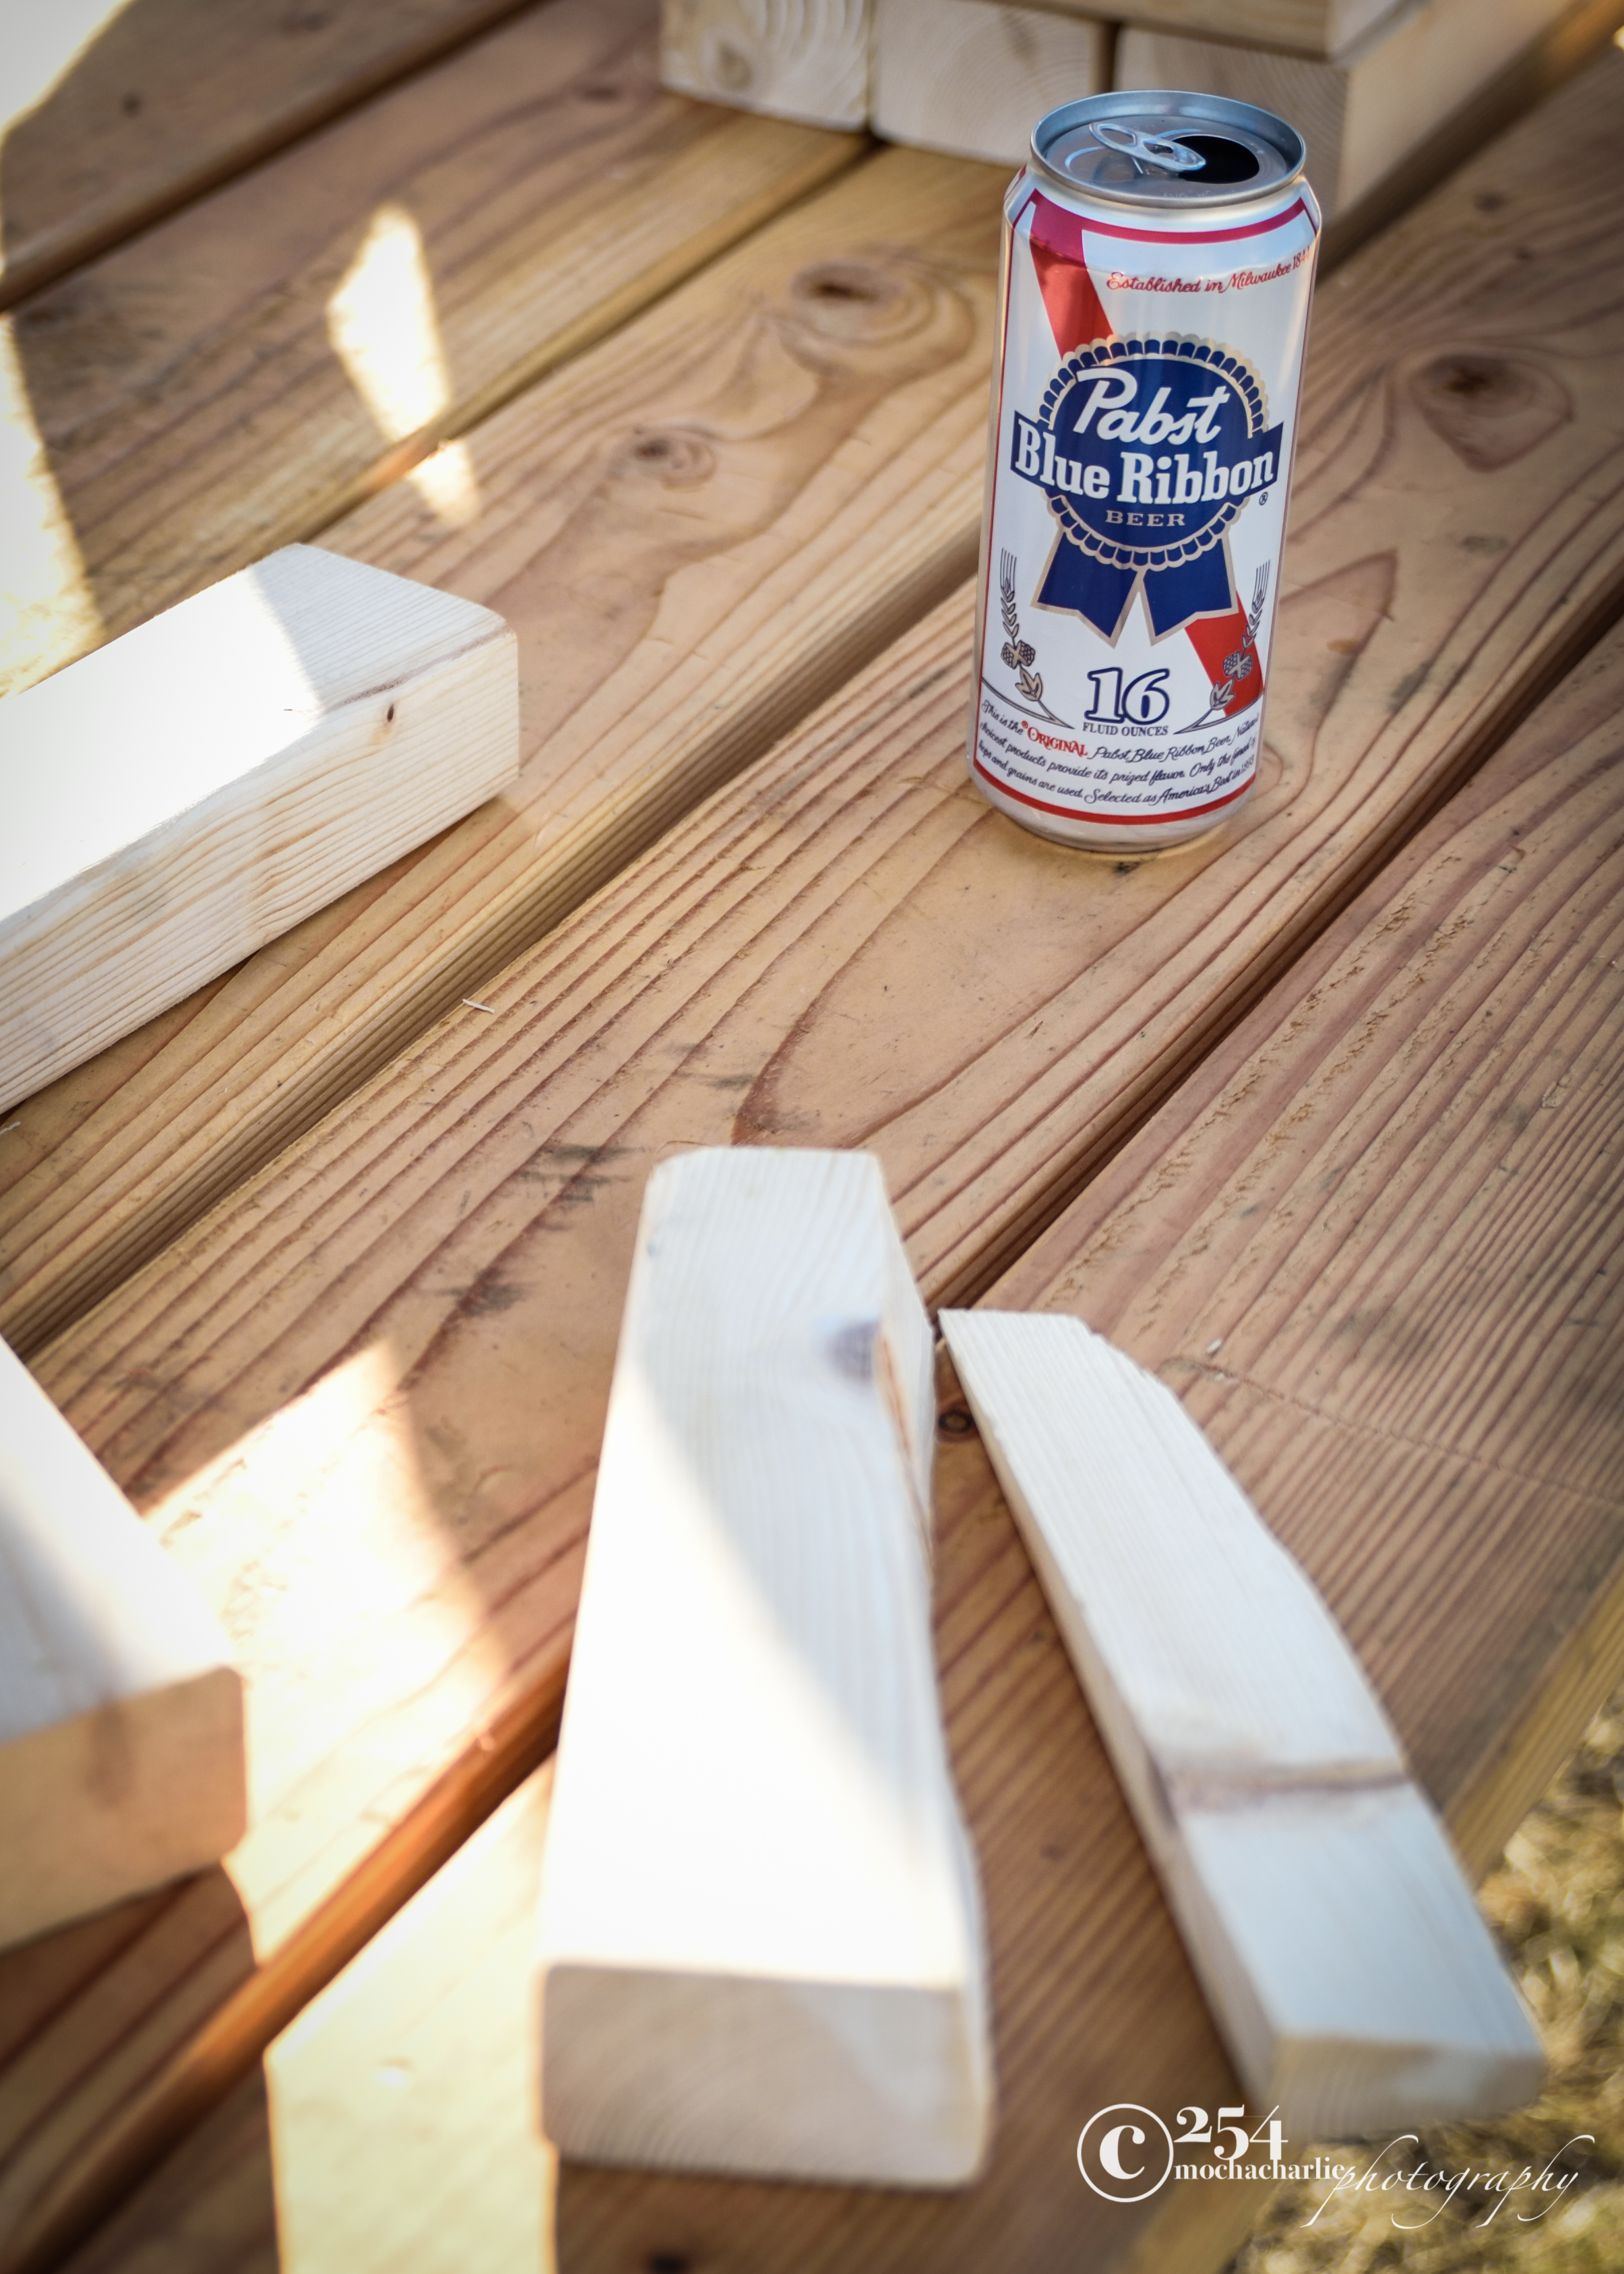 Project Pabst (Photo by Mocha Charlie)